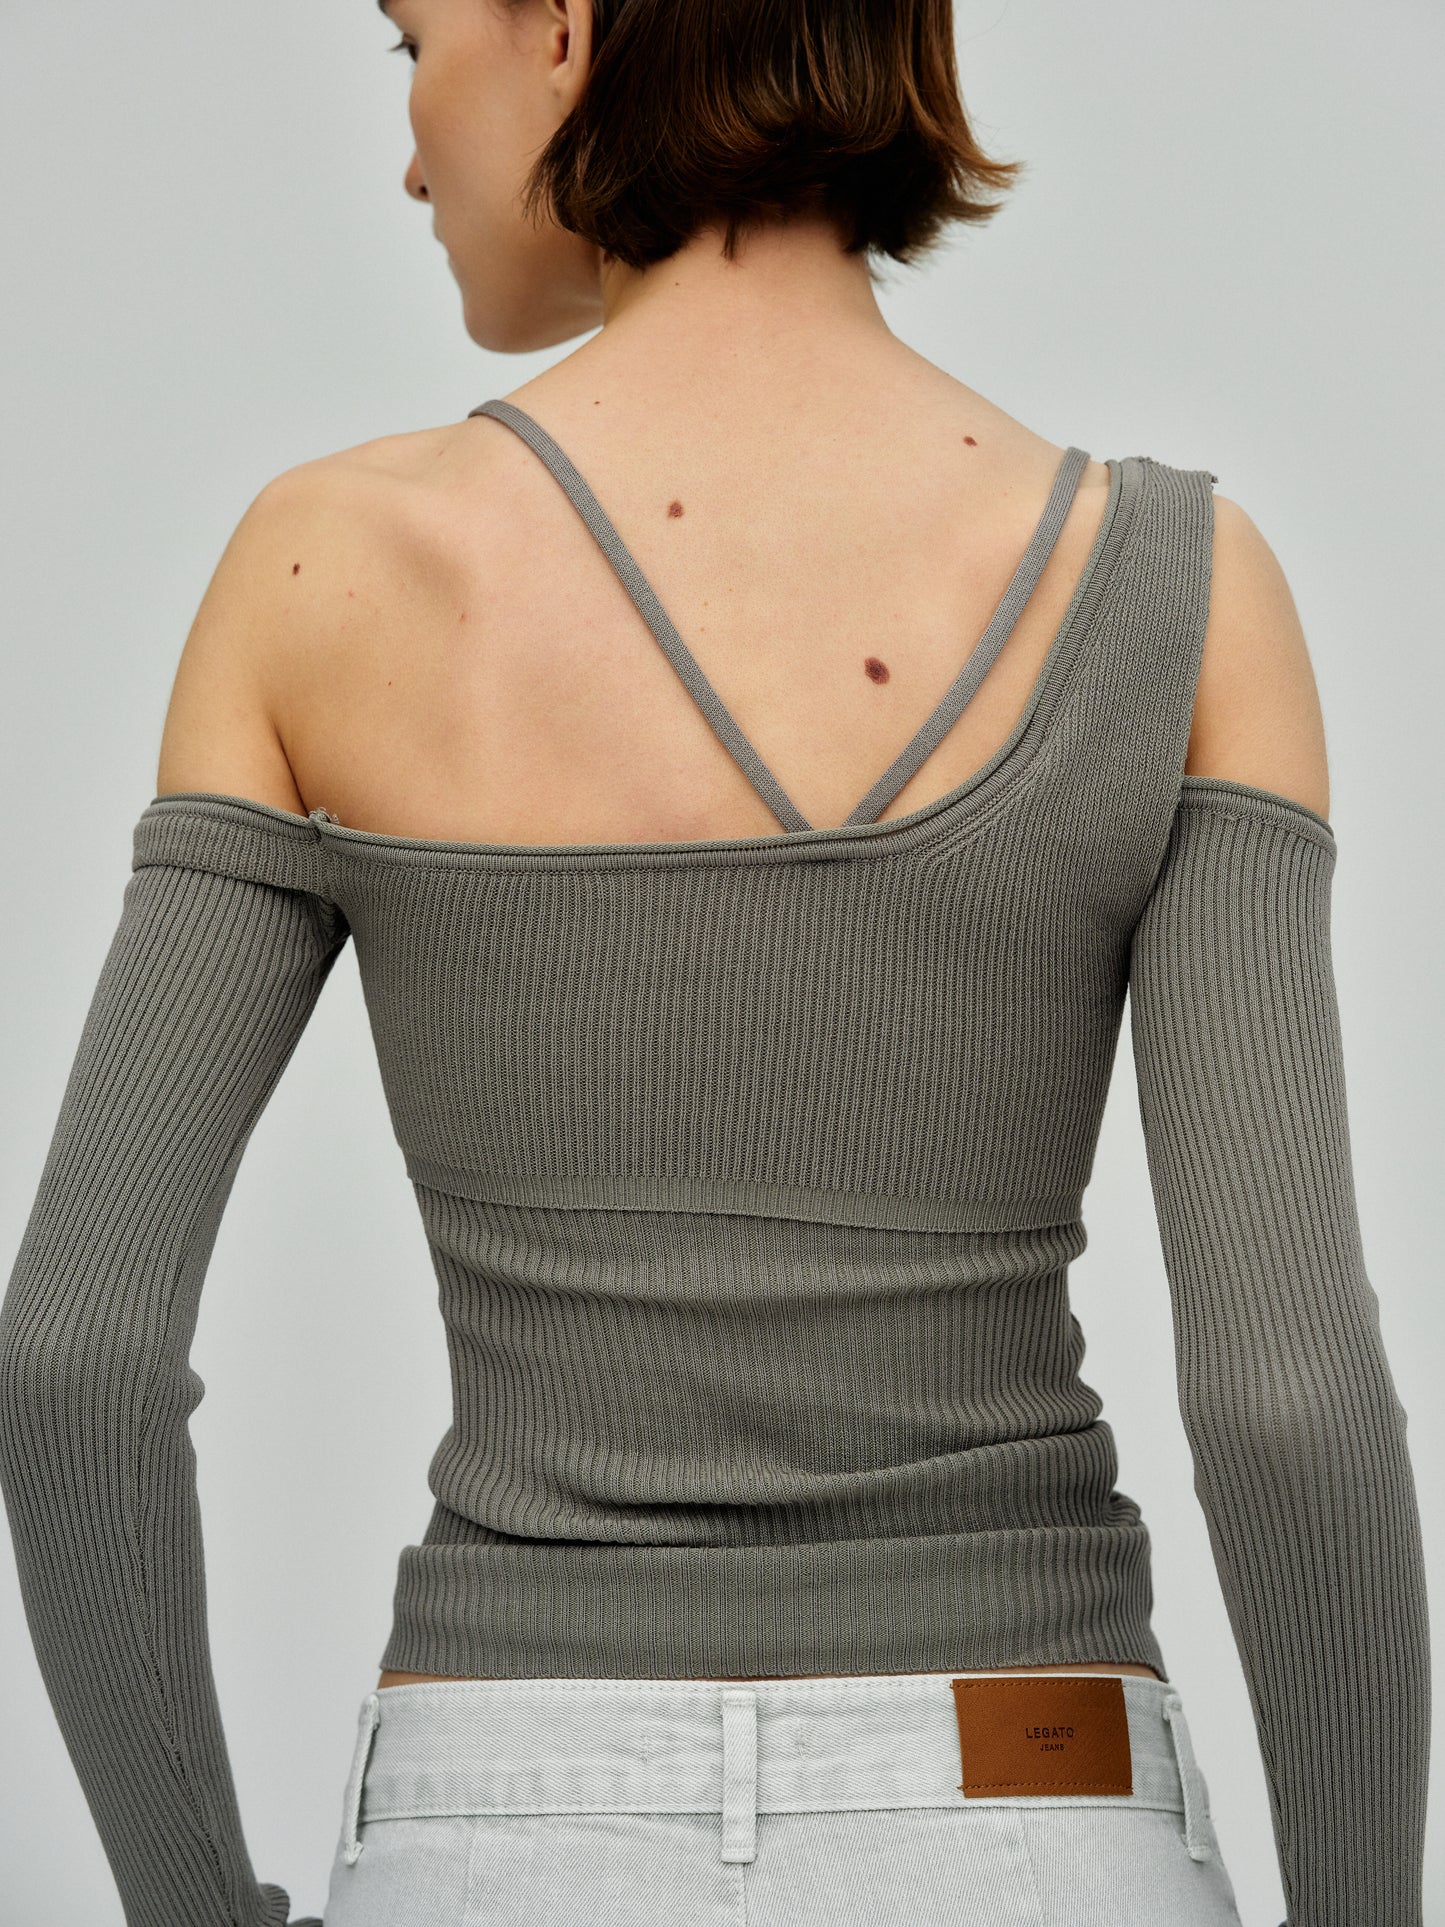 Layered Bra And Ribbed Knit Top, Thyme